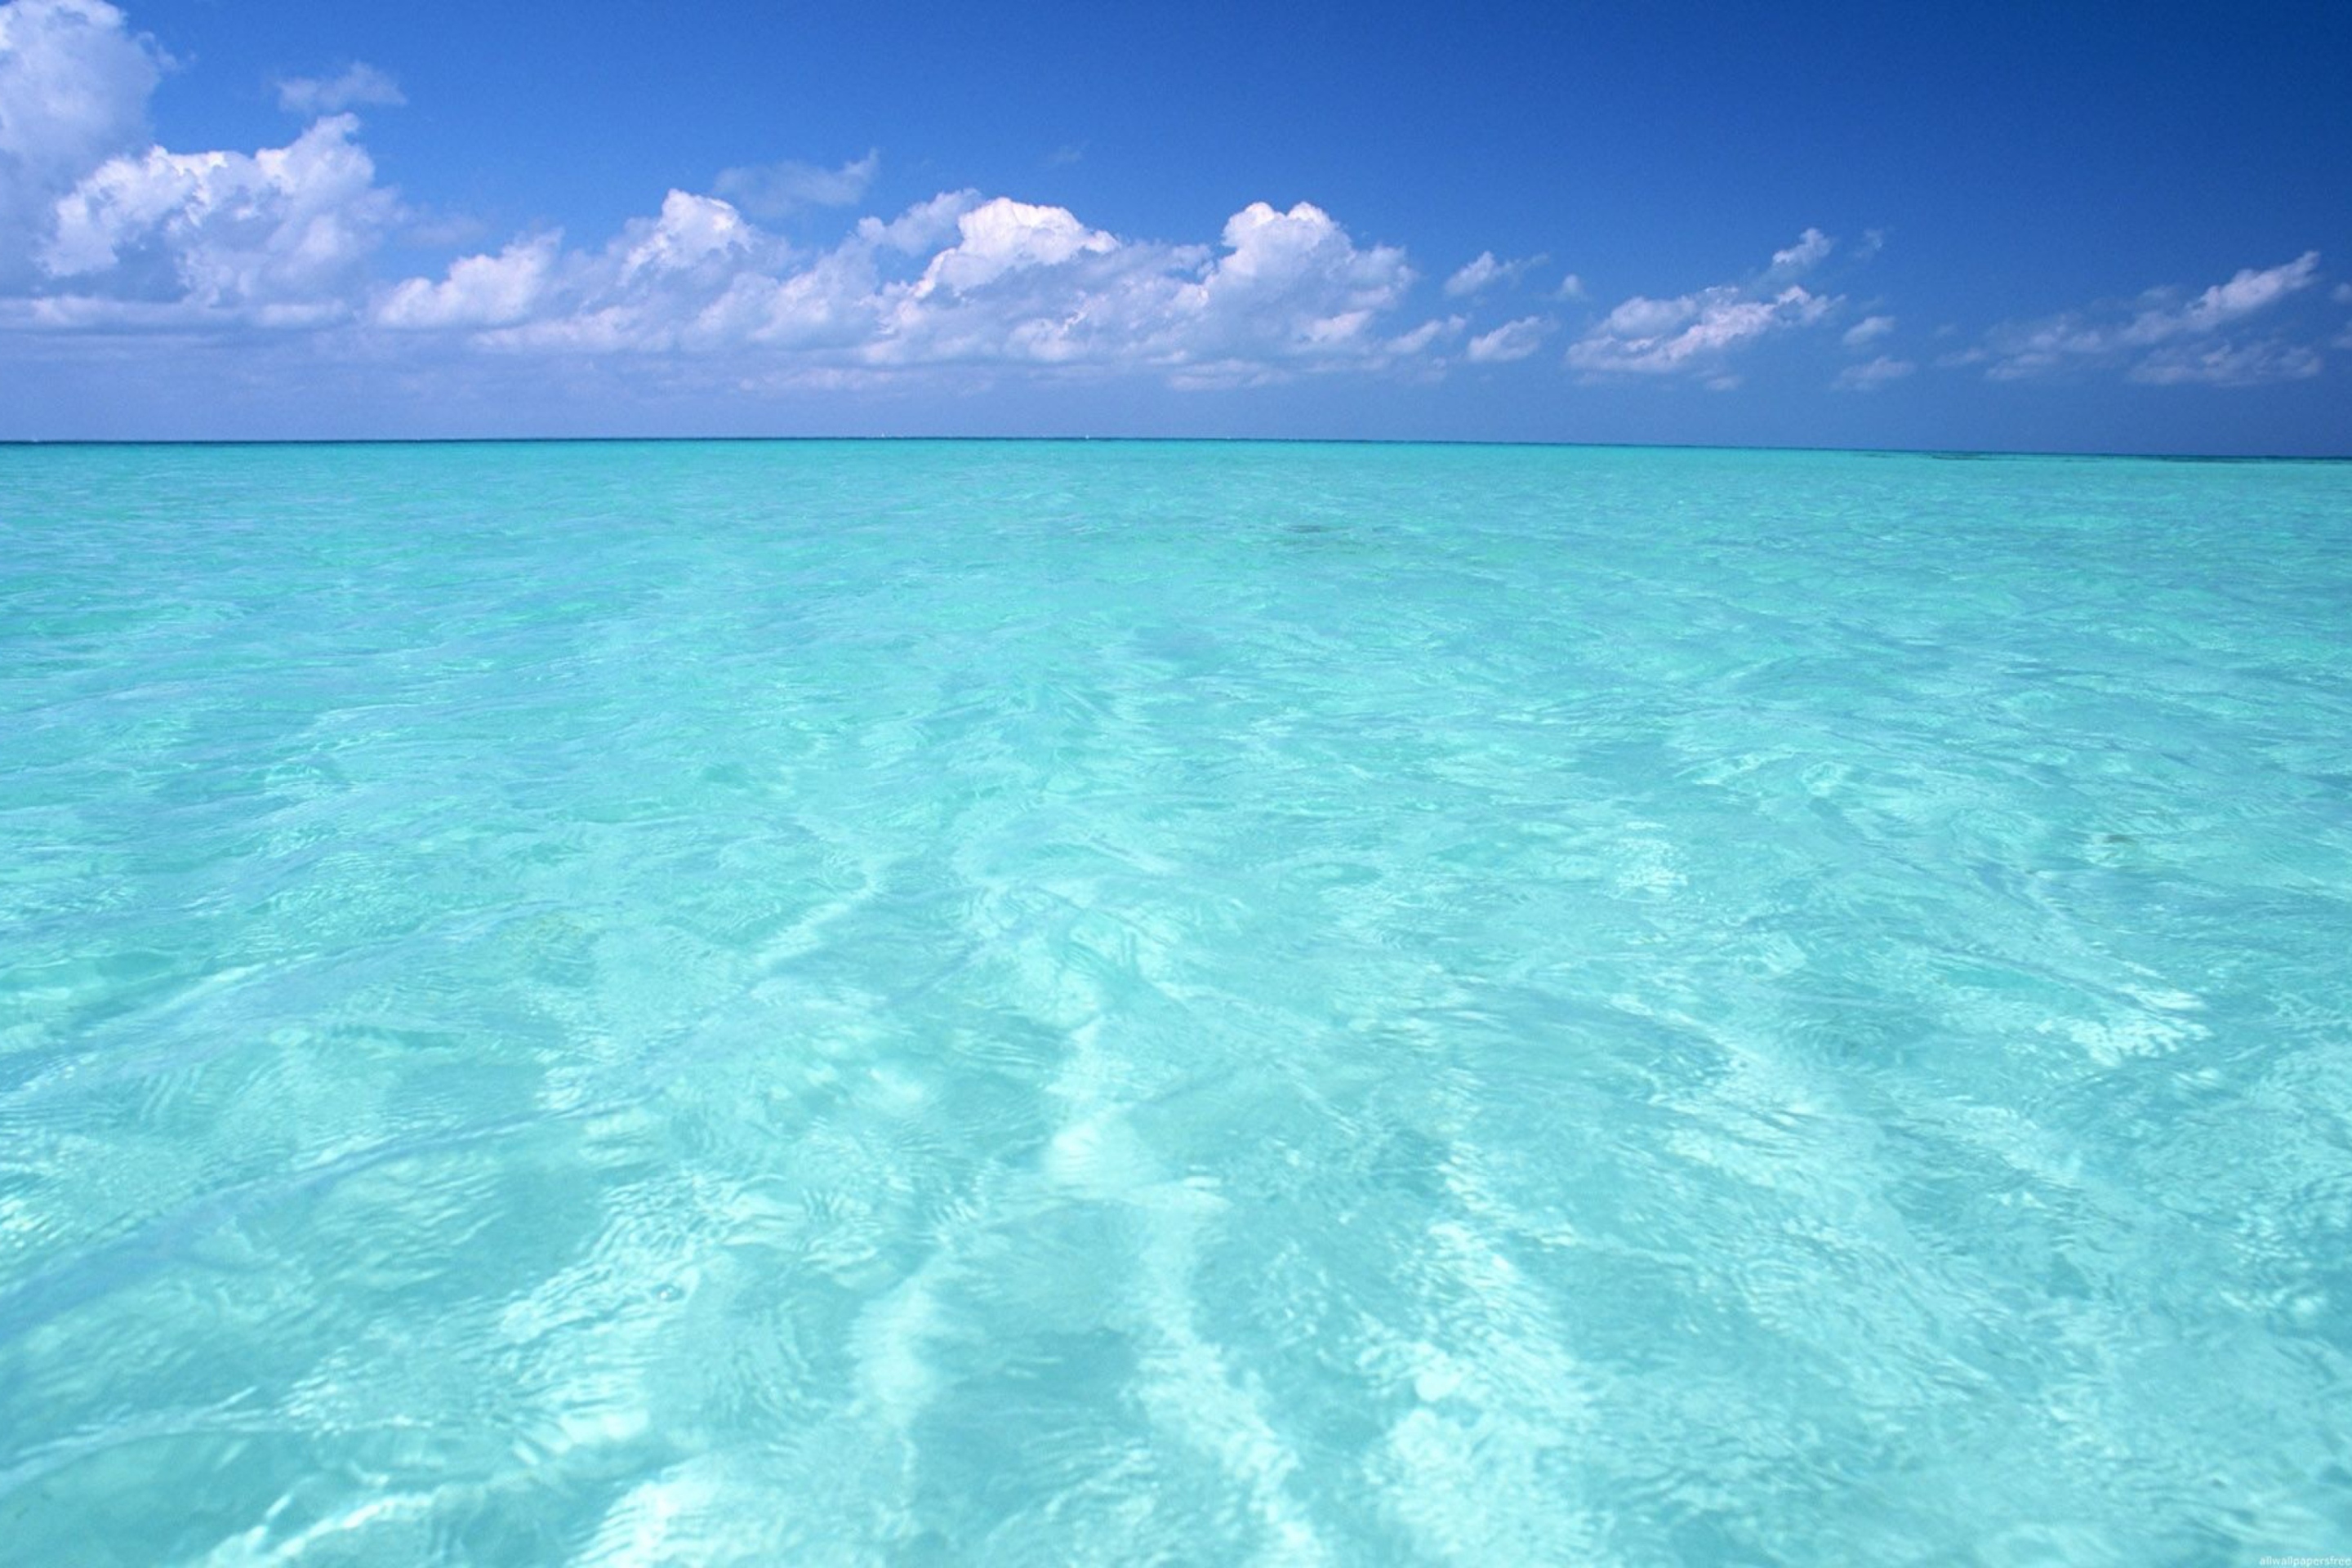 Teal Water And Blue Sky wallpaper 2880x1920